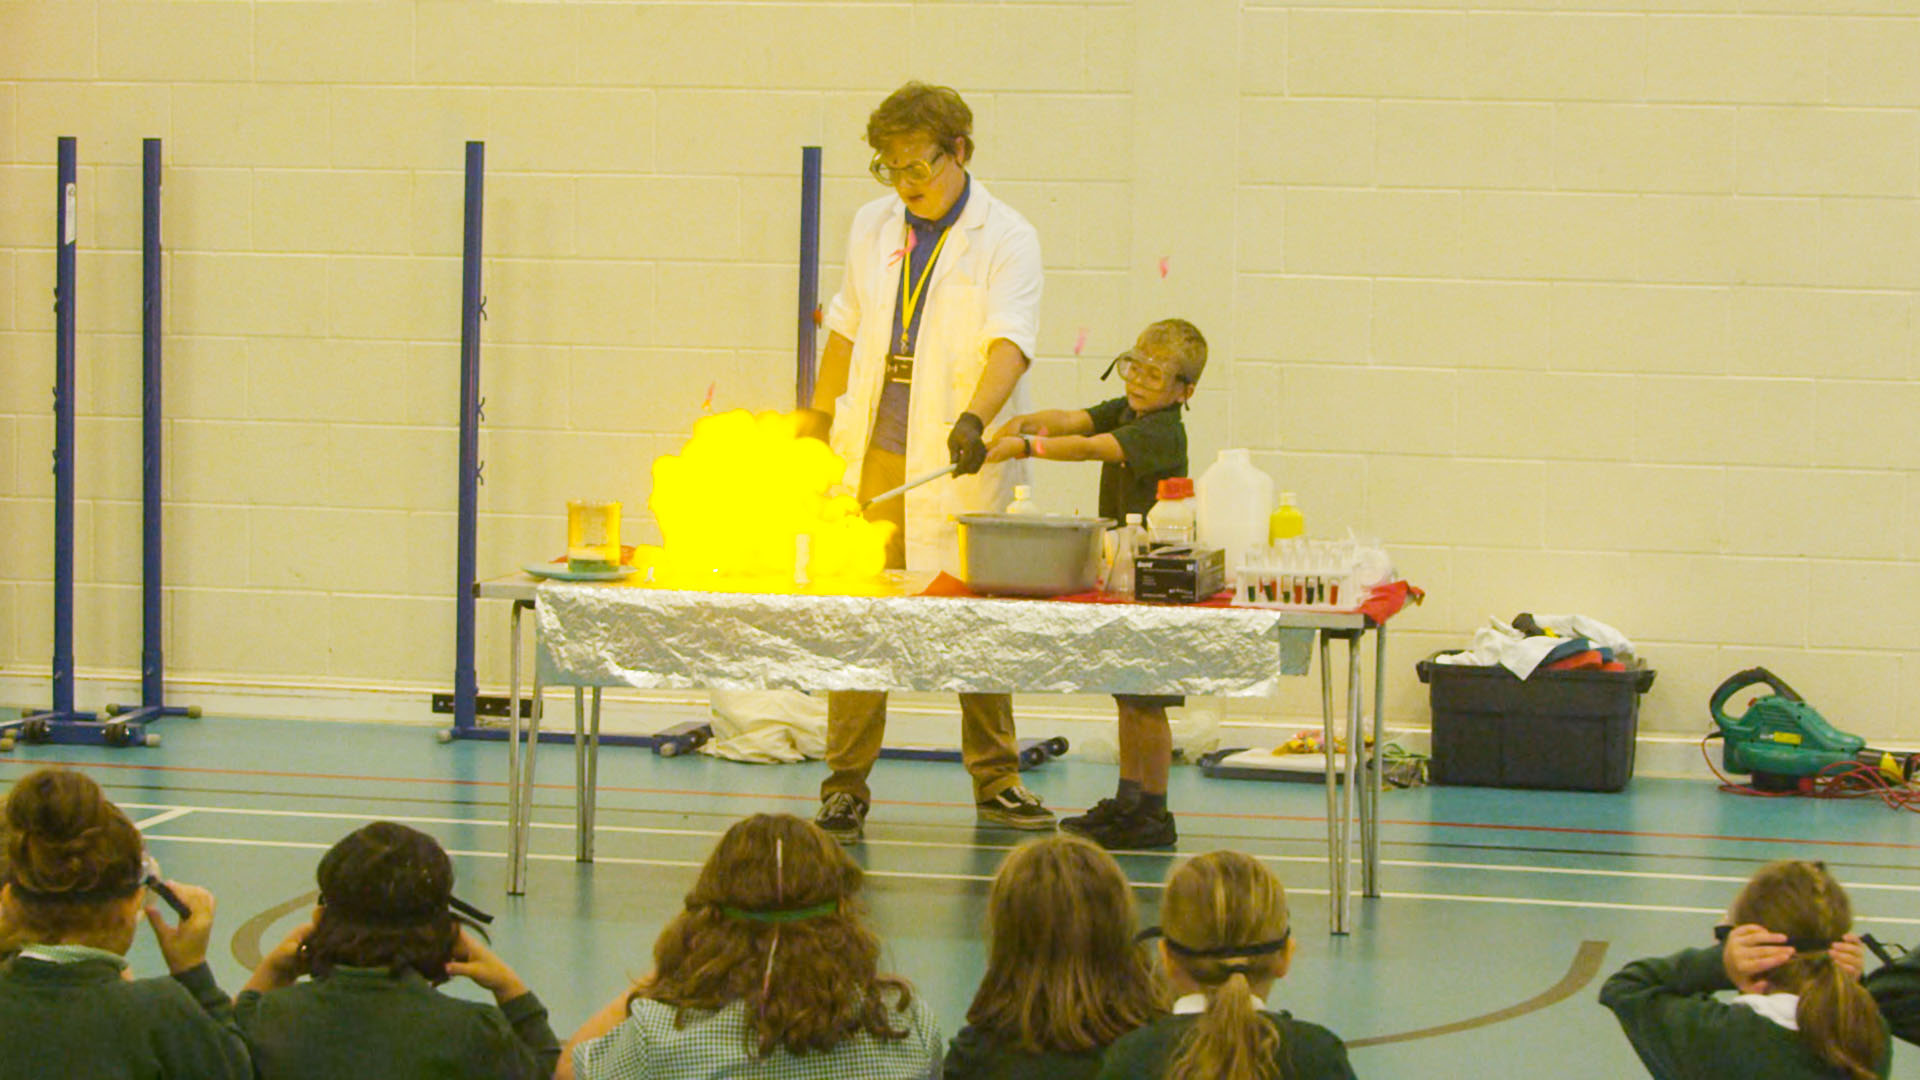 Teacher and student performing a science experiment which creates fire